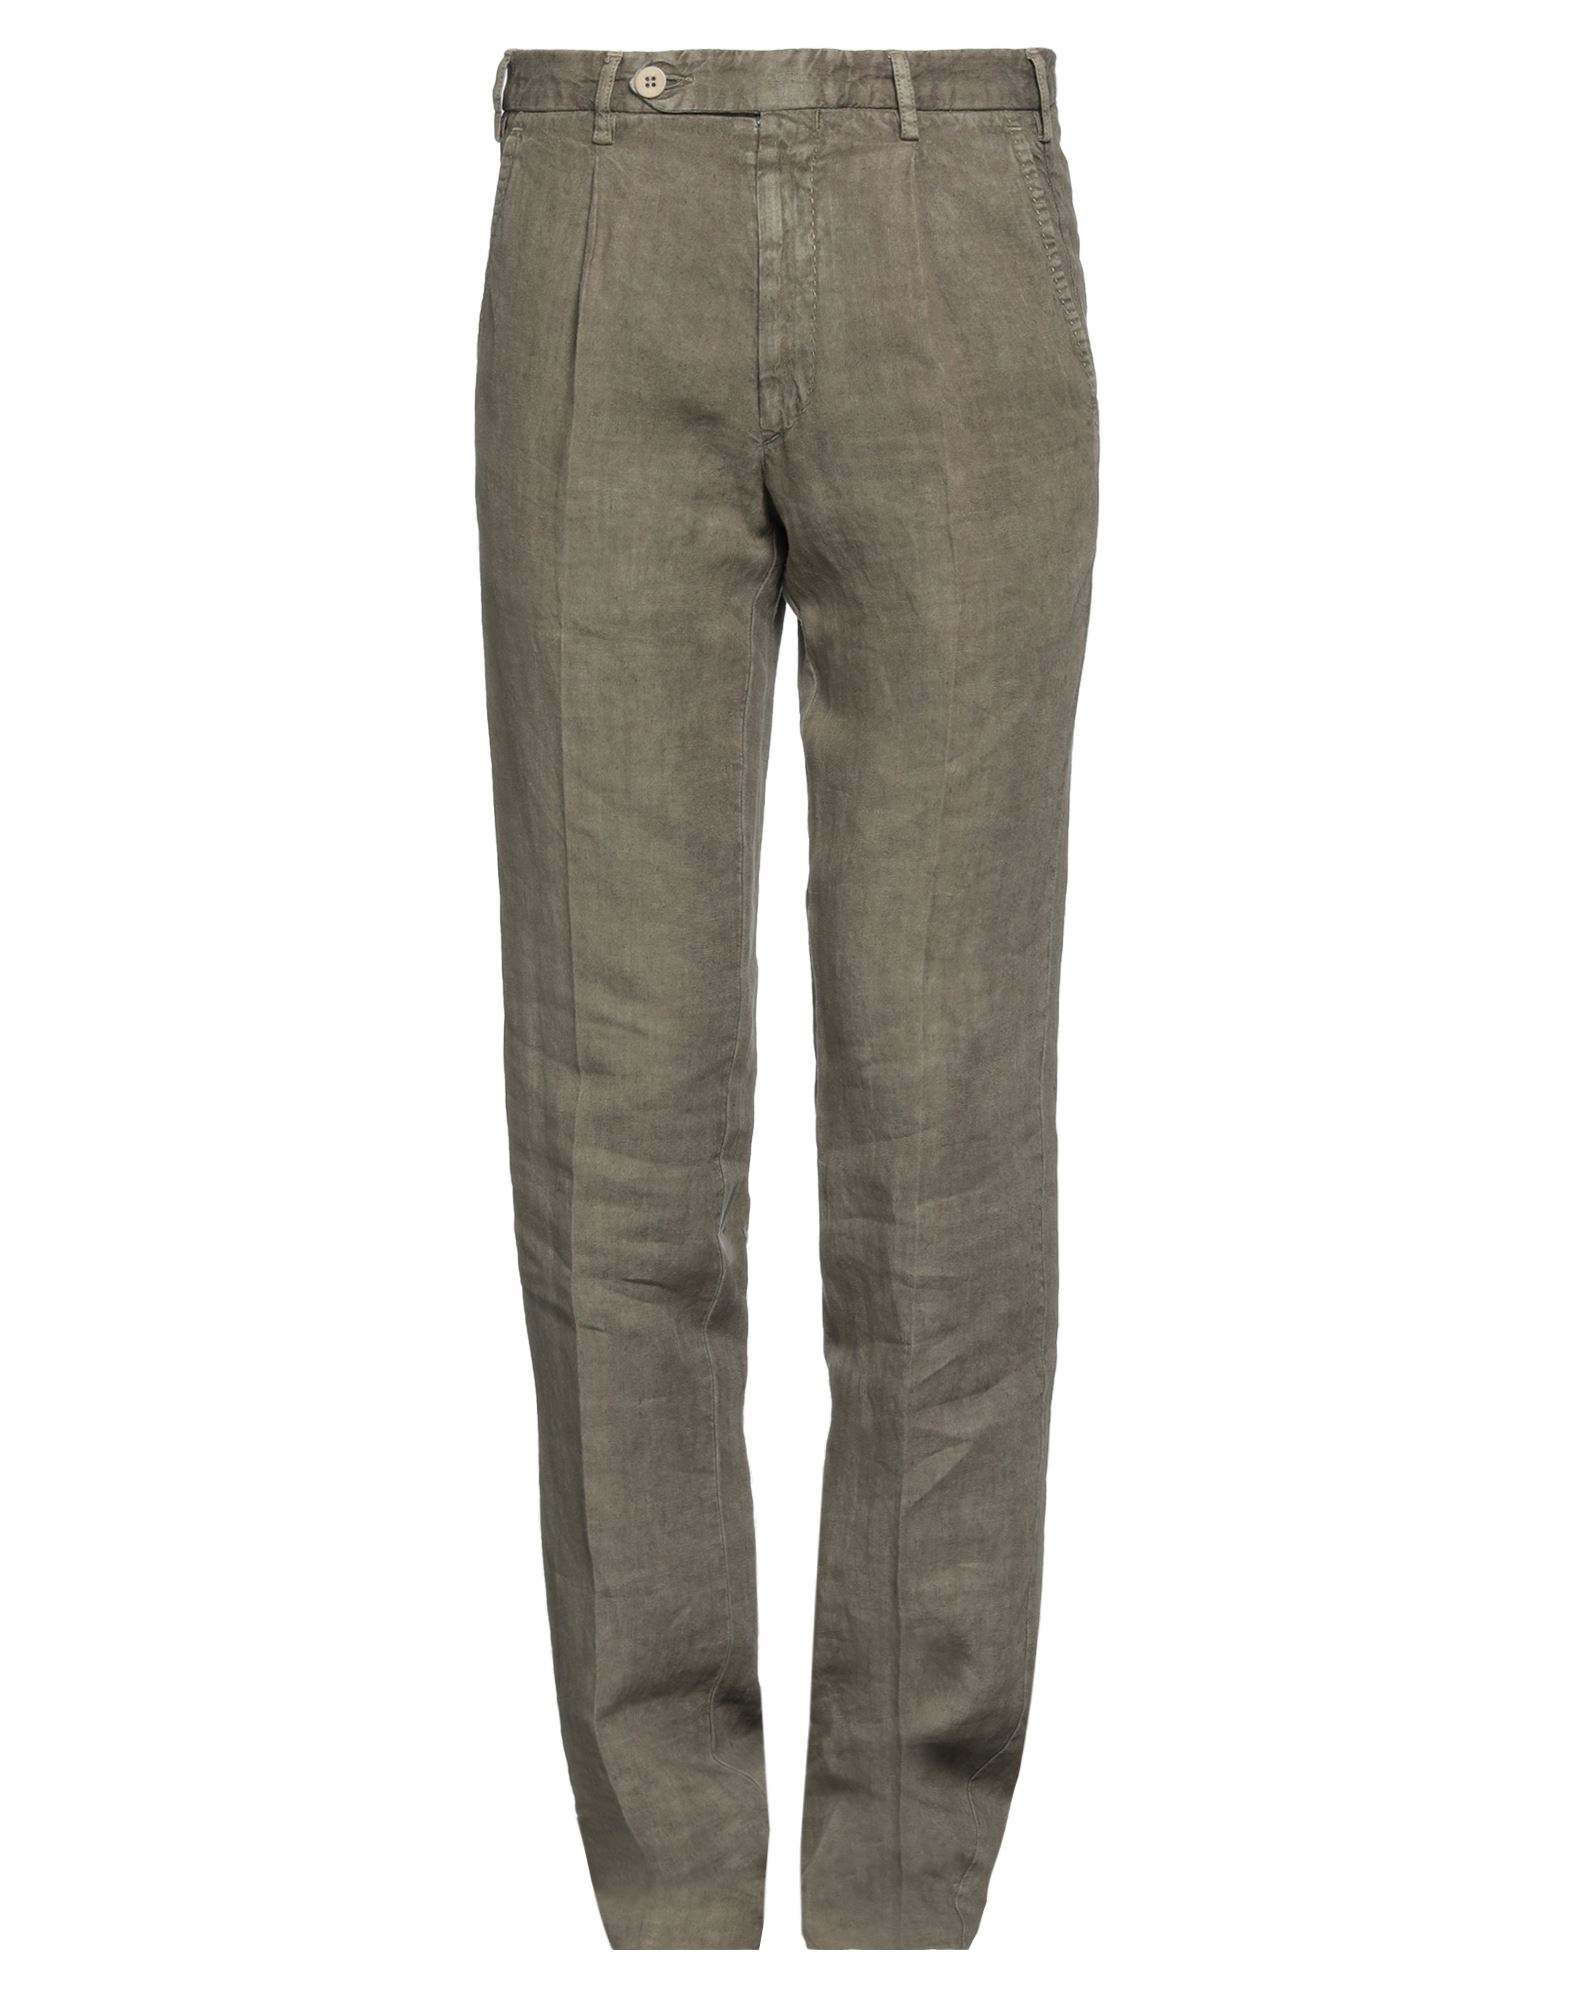 Rotasport Pants In Military Green